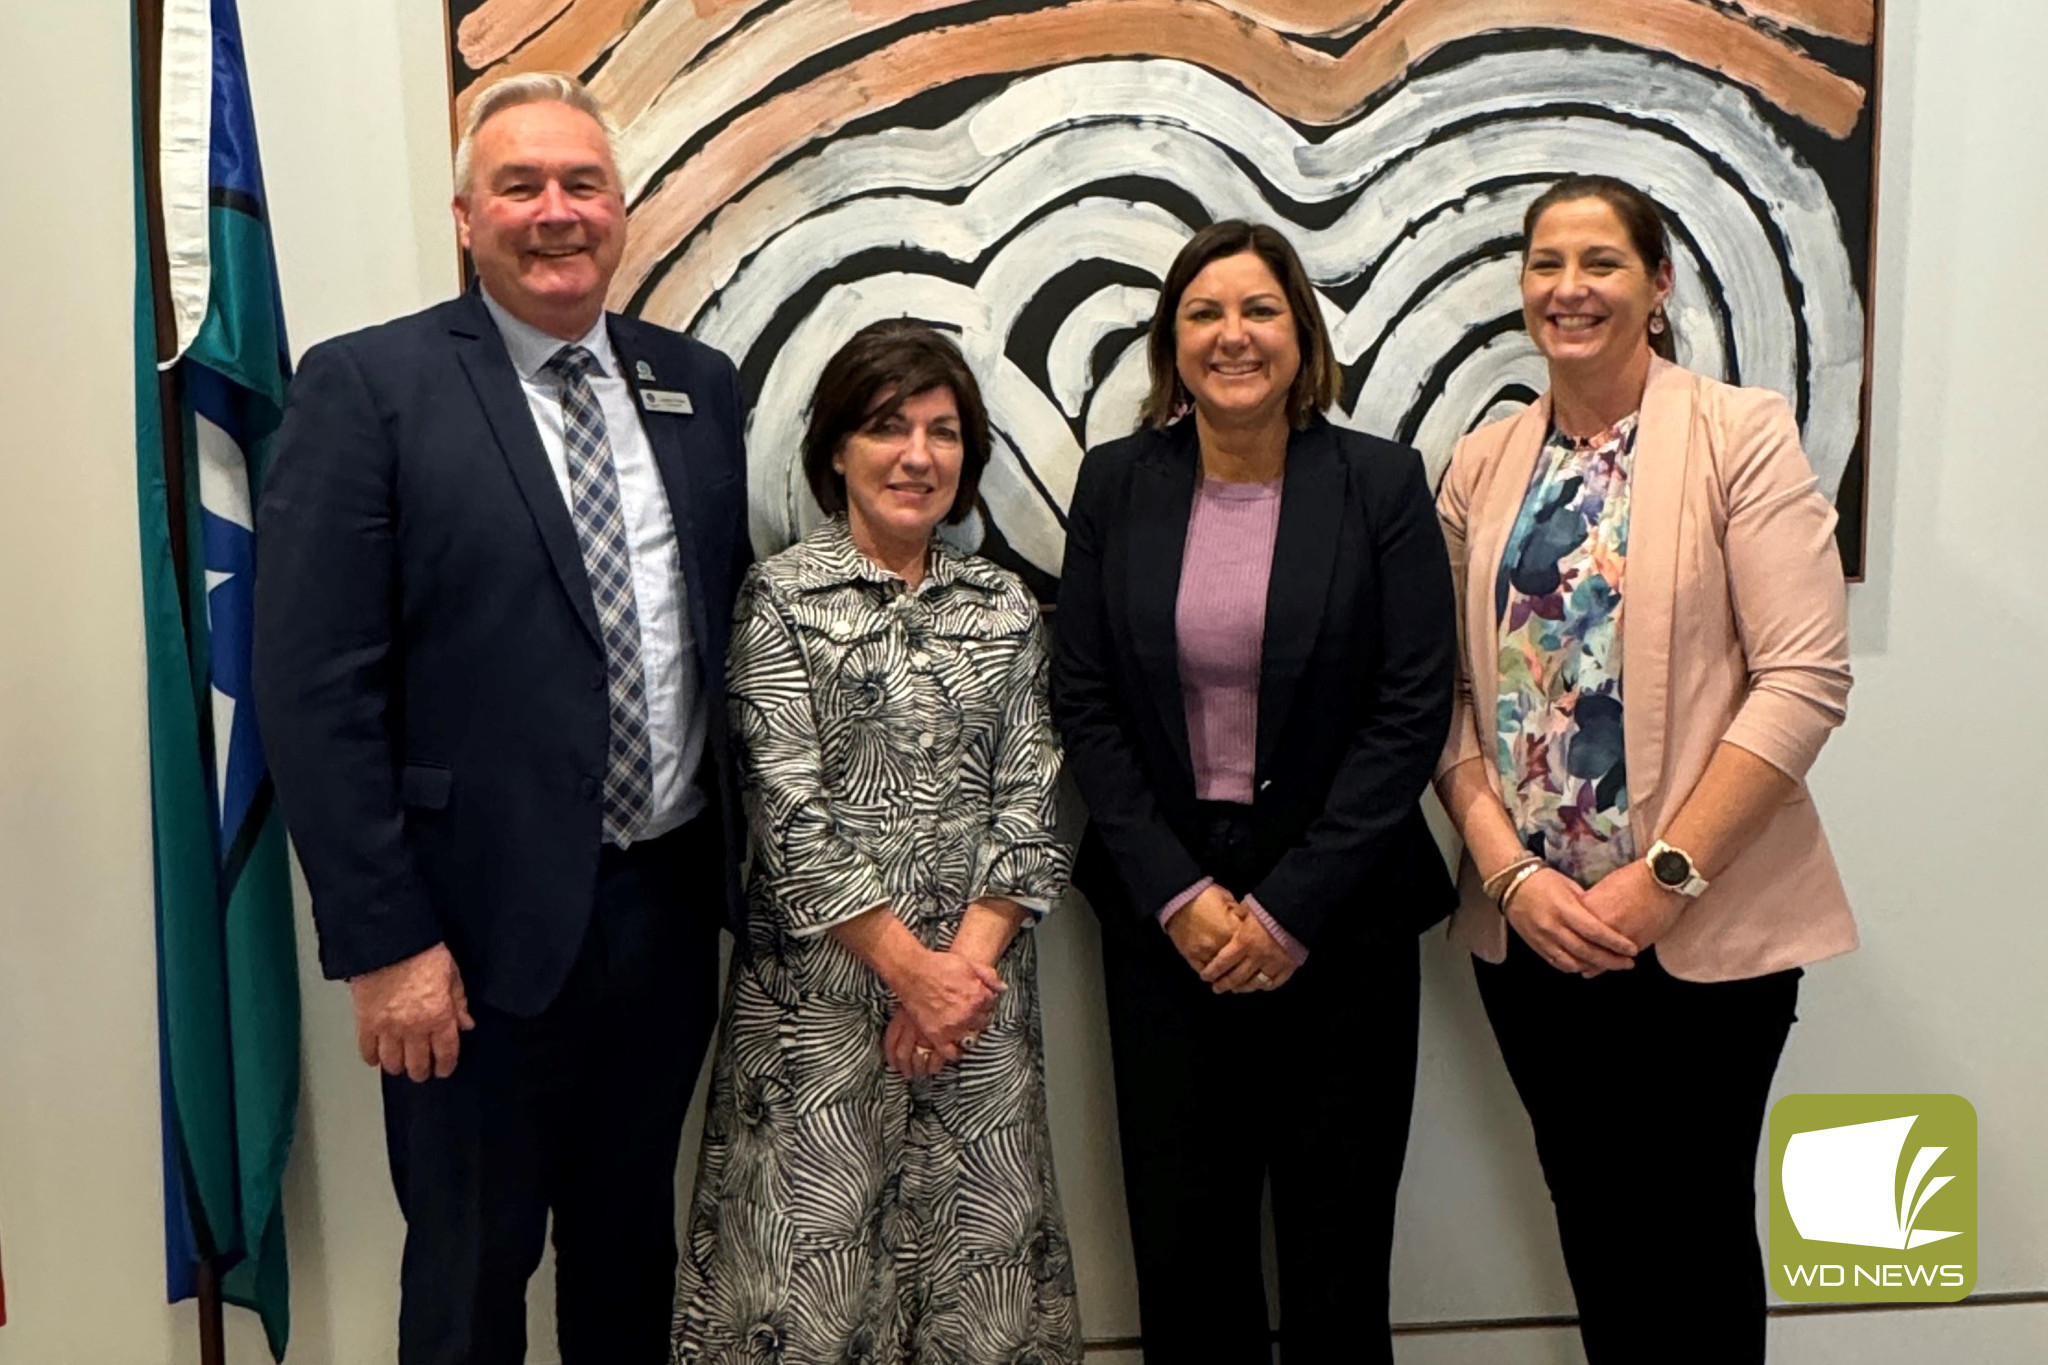 Meetings: Corangamite Shire councillors Laurie Hickey, Geraldine Conheady and Kate Makin pictured with Minister for Local Government and Minister for Regional Development Kristy McBain (third) at the recent National General Assembly of Local Government in Canberra.